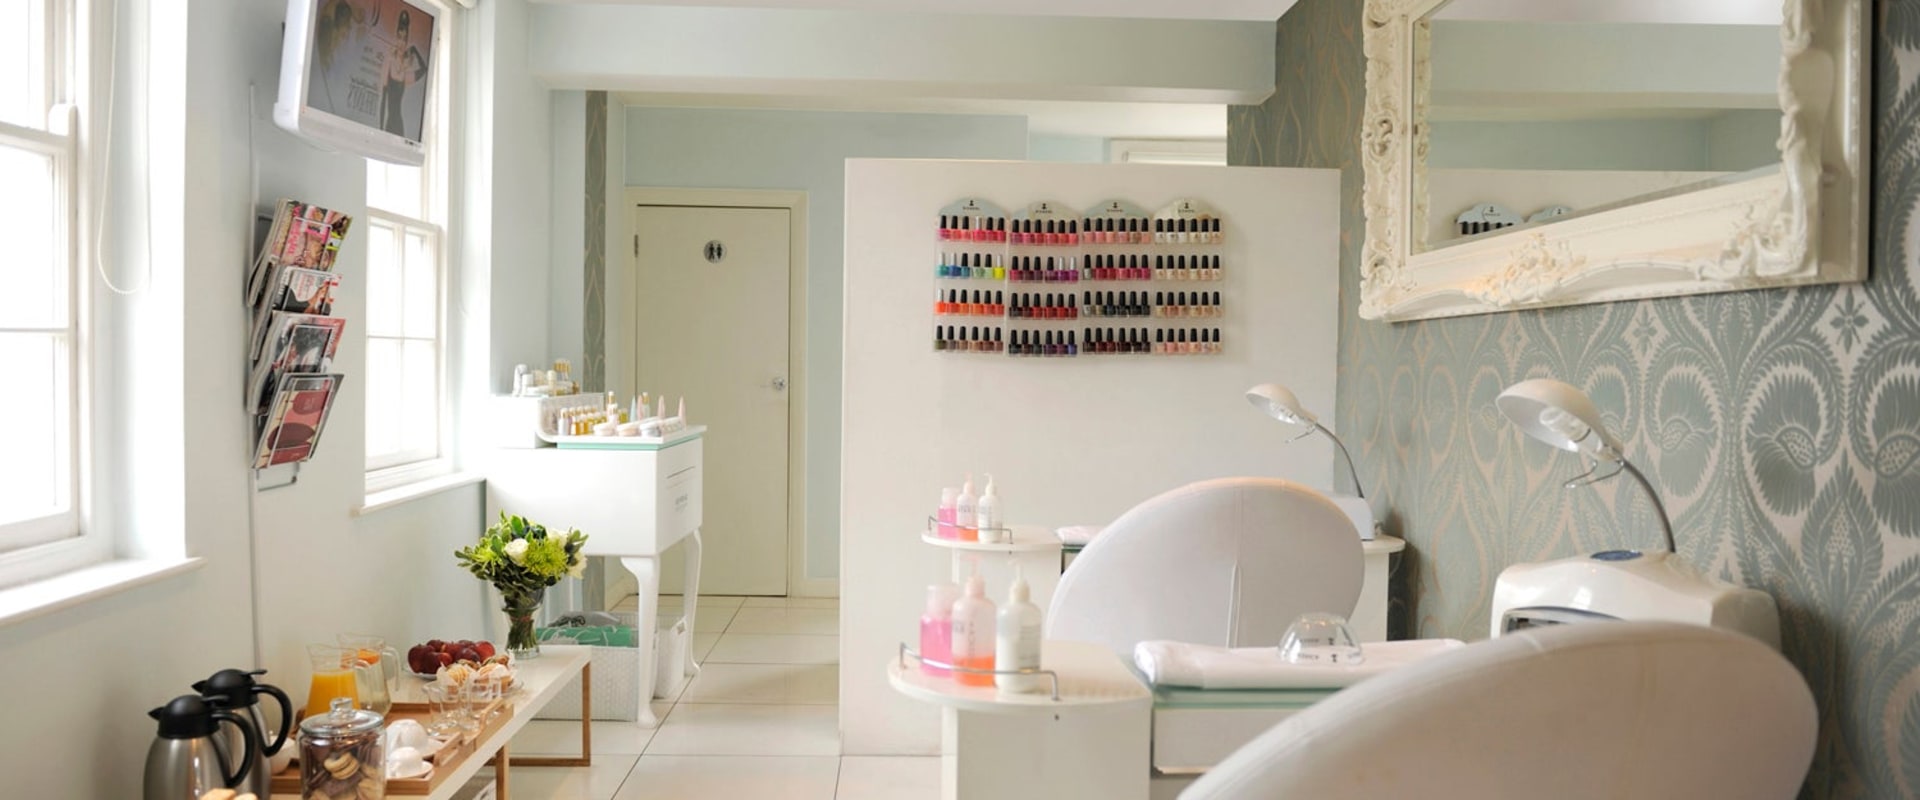 Beauty Salons in London: Get Discounts as a Student